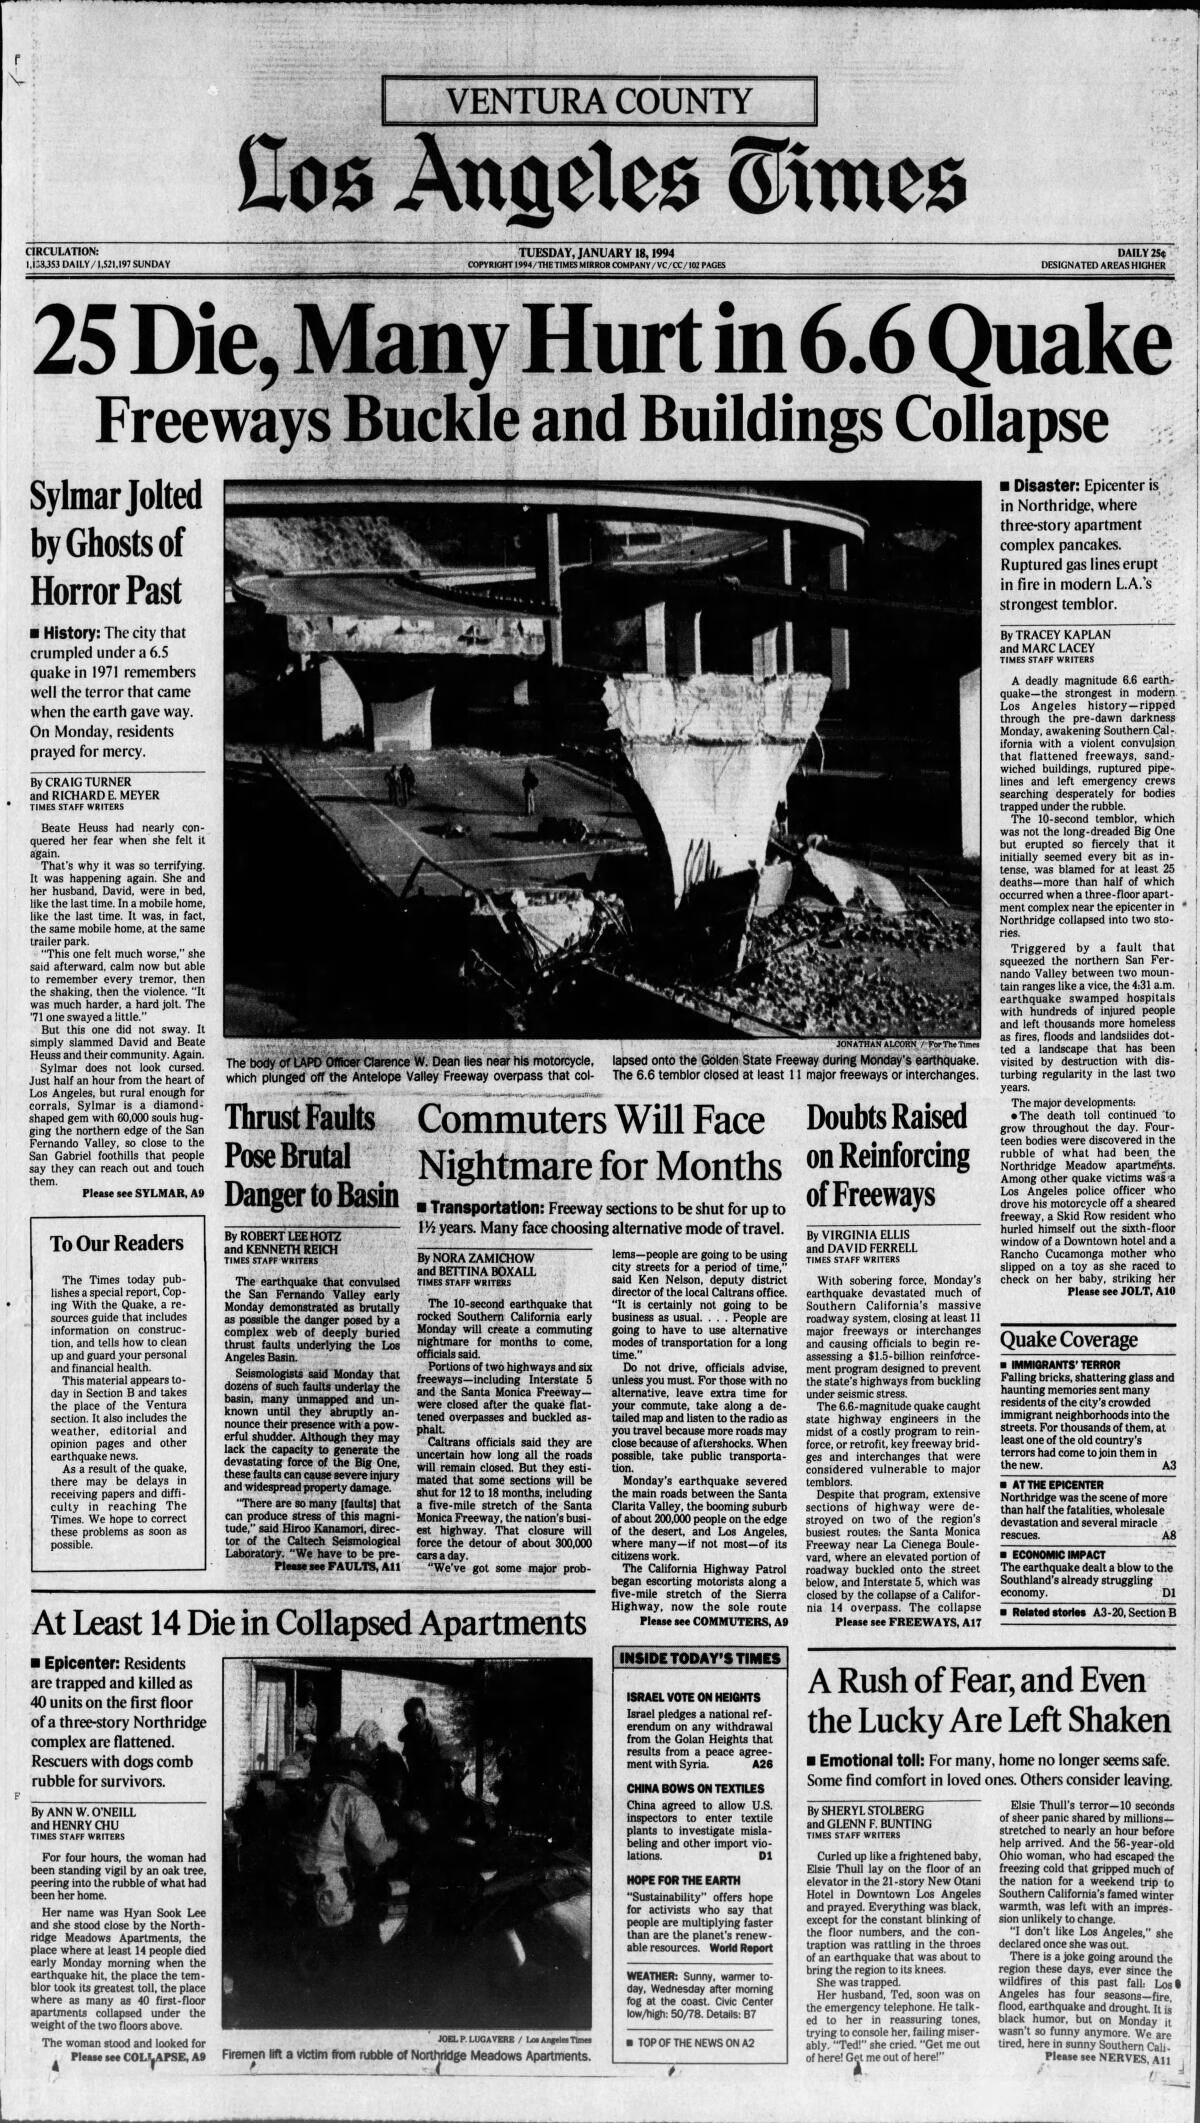 The Los Angeles Times dedicated the front page to coverage of a 6.7 magnitude quake centered in Northridge